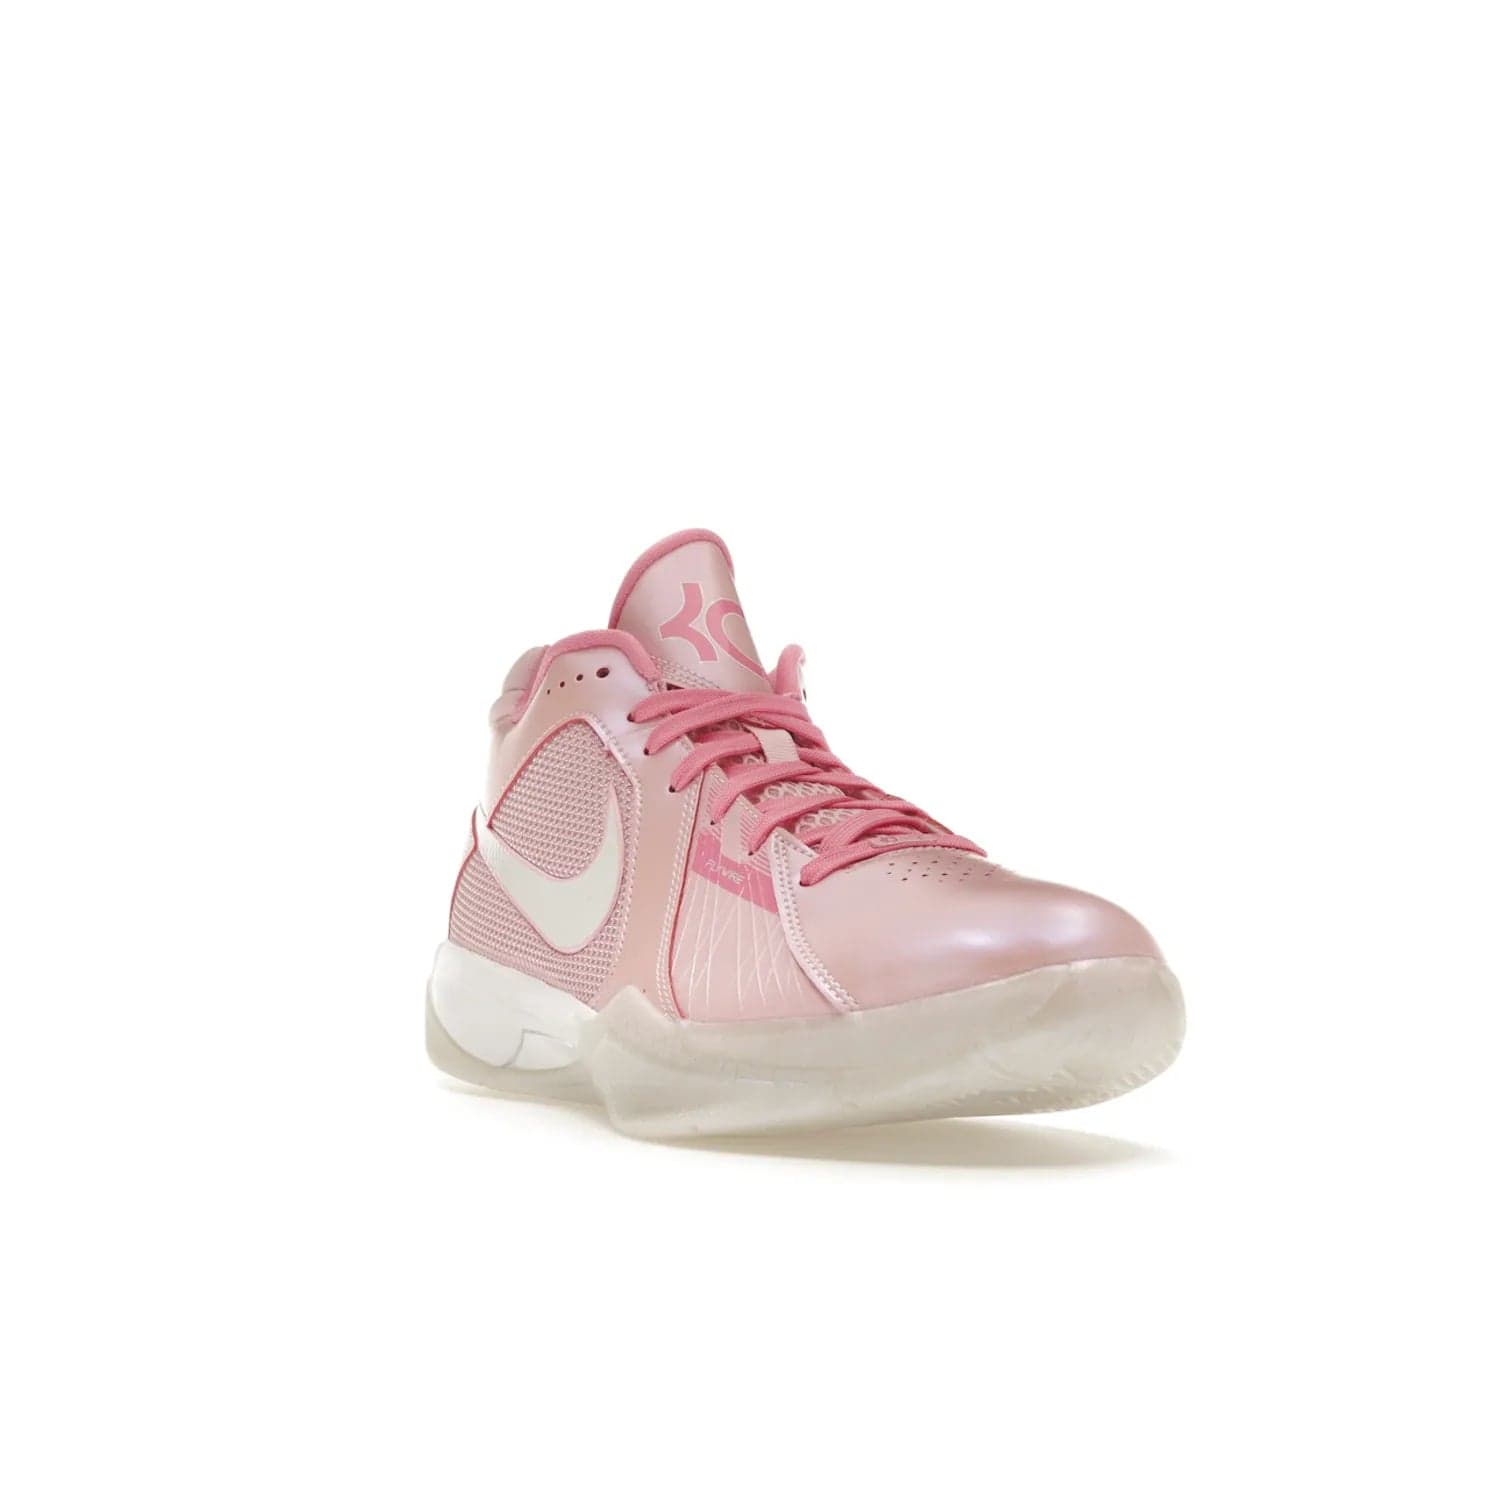 Nike KD 3 Aunt Pearl - Image 7 - Only at www.BallersClubKickz.com - Introducing the Nike KD 3 Aunt Pearl. Featuring a bold Medium Soft Pink, White, & Lotus Pink colorway. Get ready to stand out this October 15th.